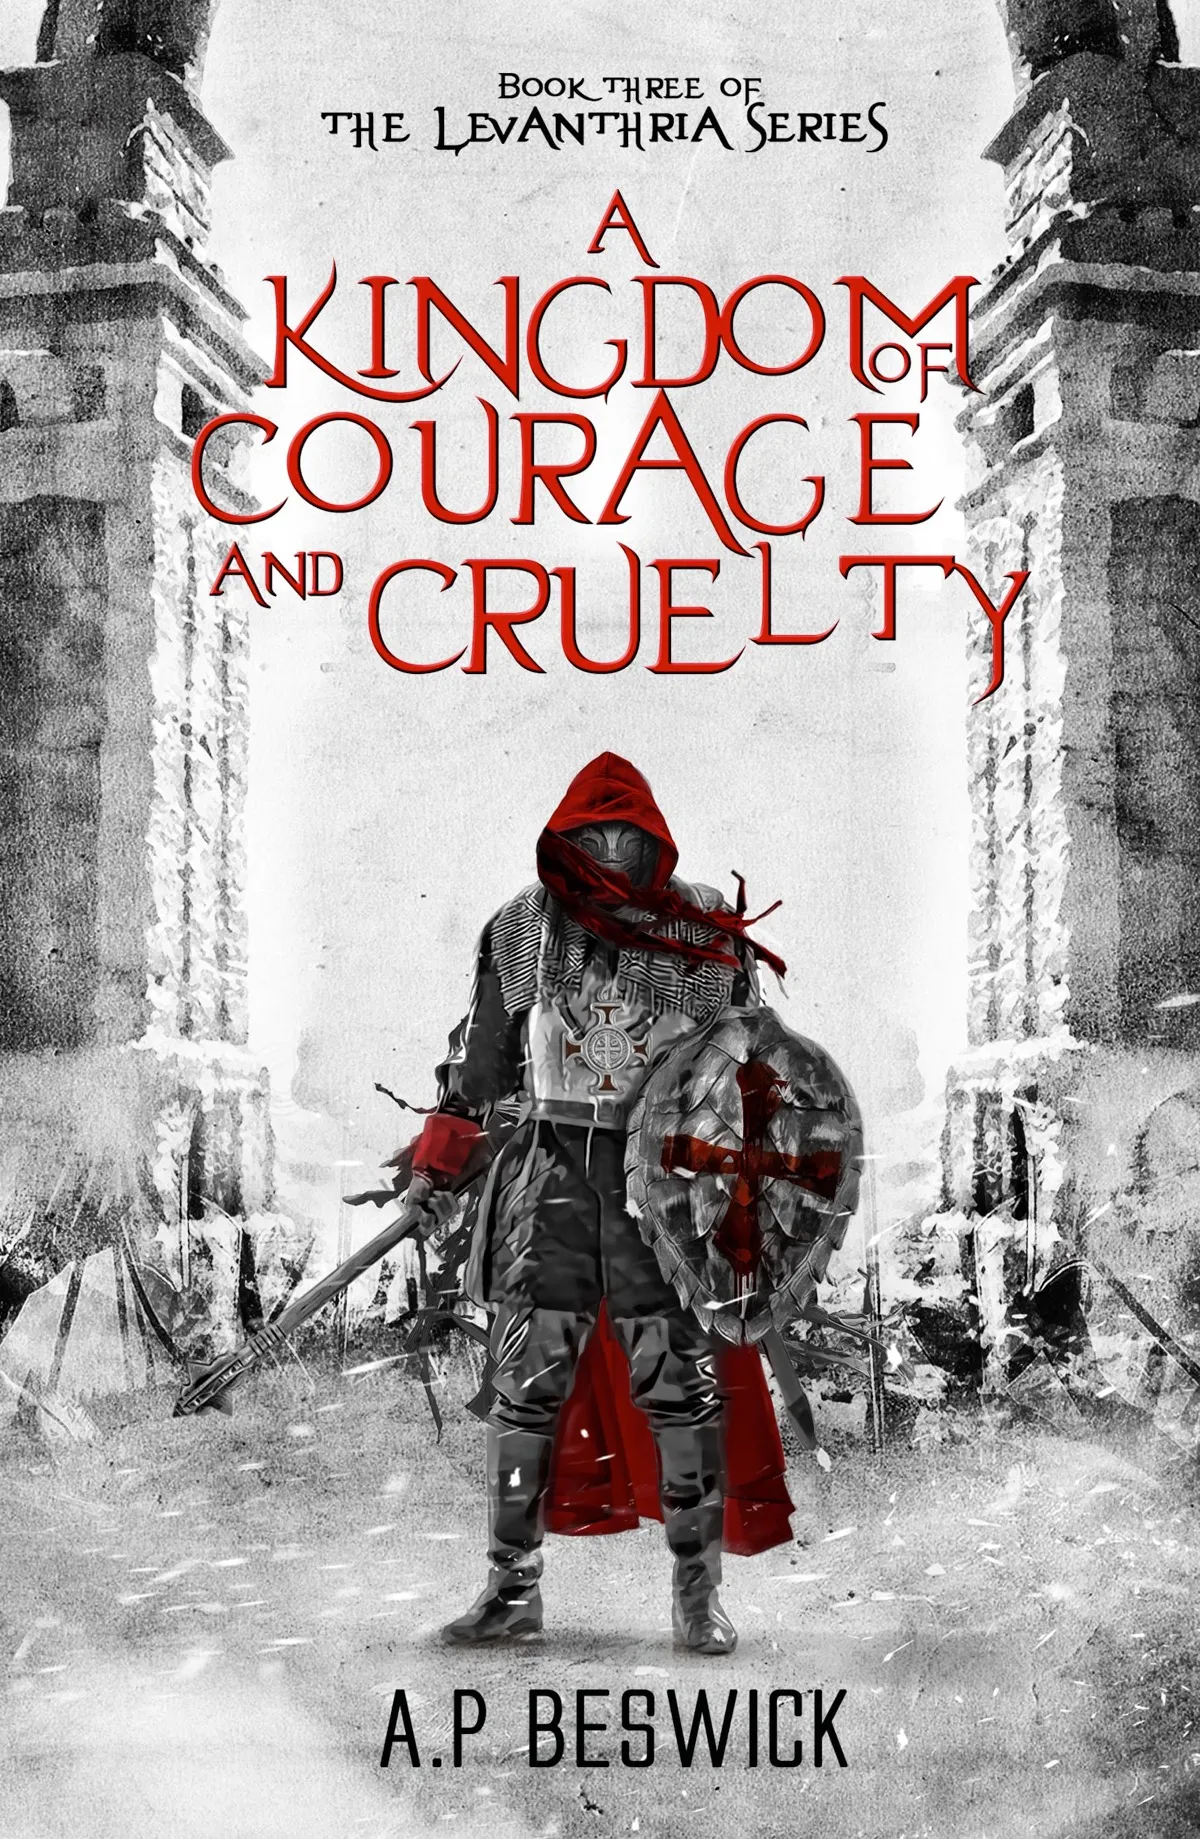 A Kingdom Of Courage And Cruelty (The Levanthria #3)